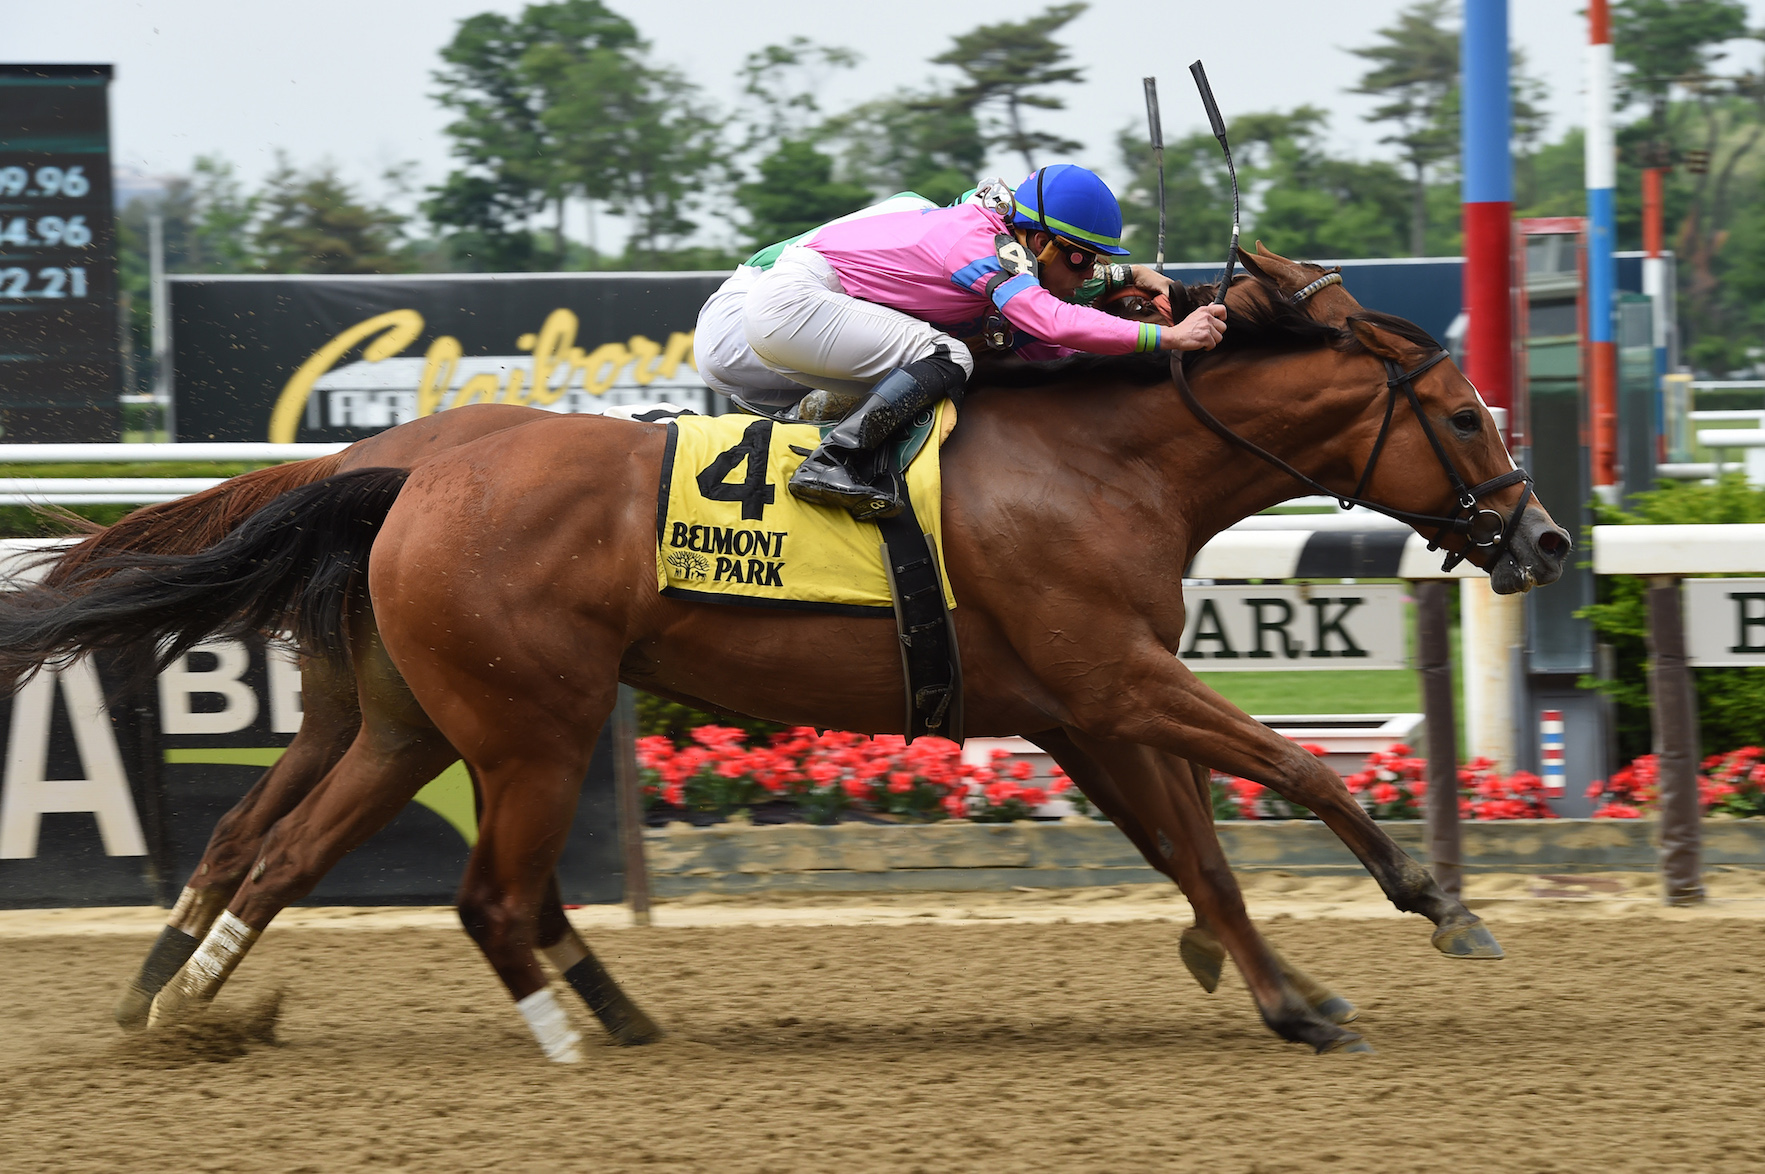 Holiday Disguise and Irad Ortiz winning the Critical Eye at the Belmont Park showcase day on Monday. Photo: Susie Raisher/NYRA.com